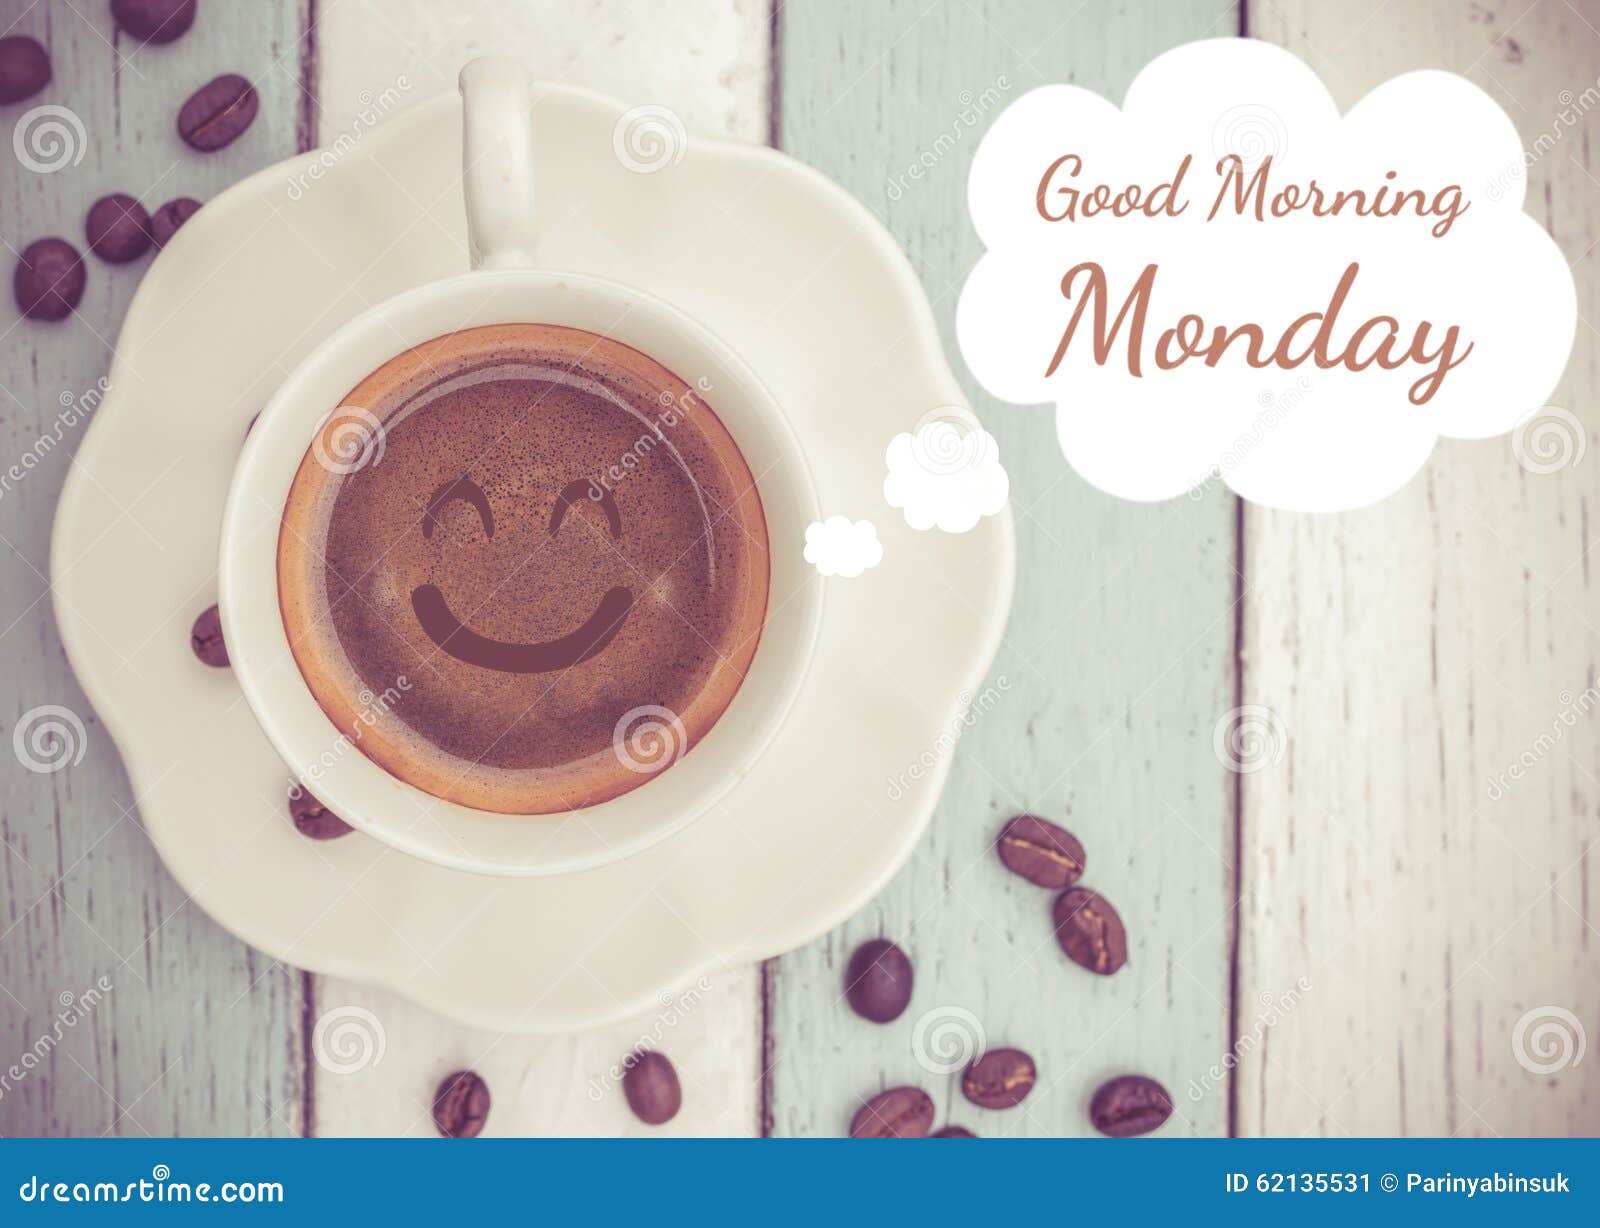 Good Morning Monday with Coffee Cup Stock Image - Image of brown ...